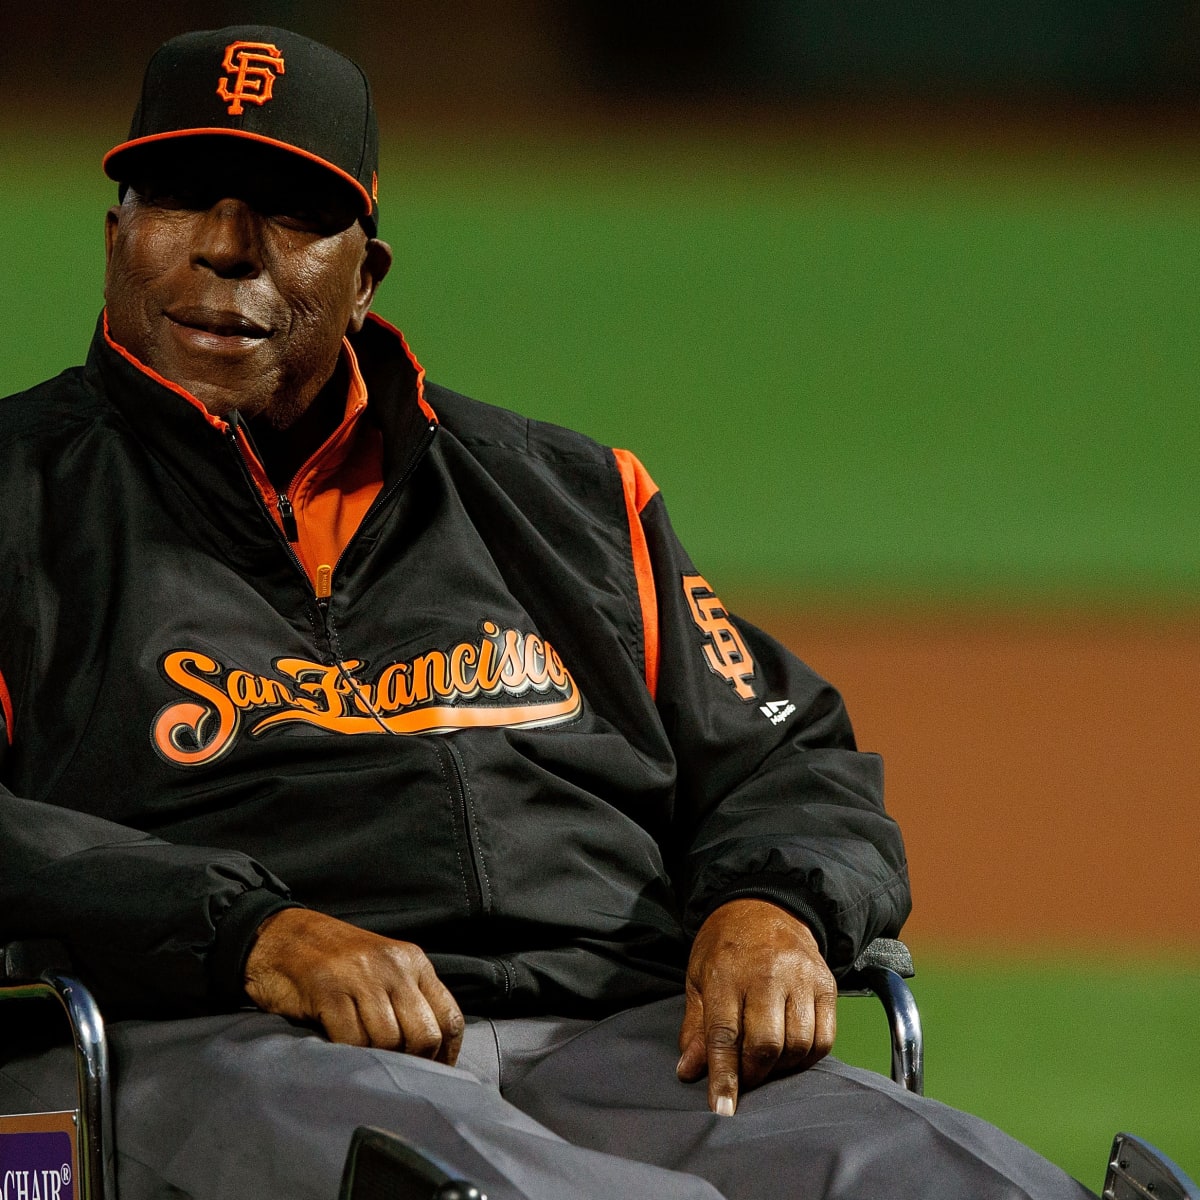 Barry Bonds and media availability - who's to blame? - McCovey Chronicles